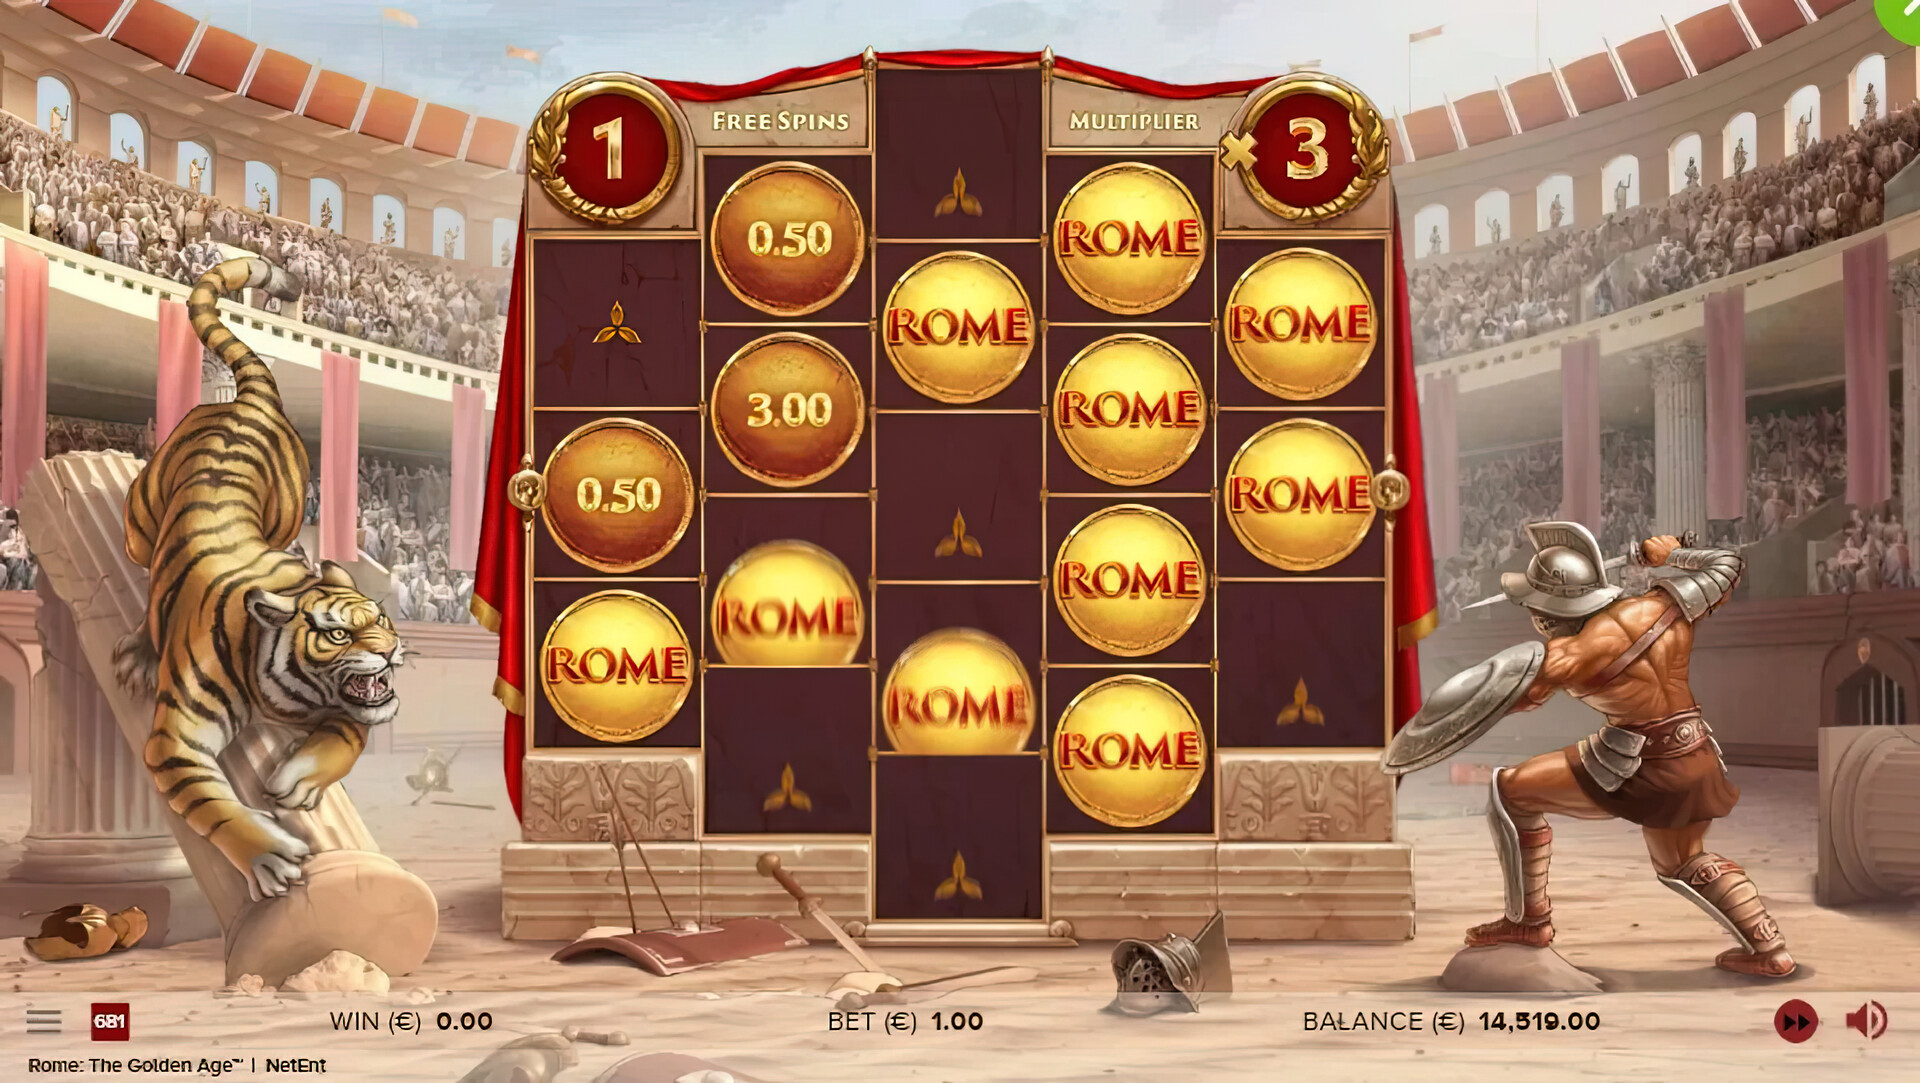  rome the golden age free spins gigapixel art scale 2 00x